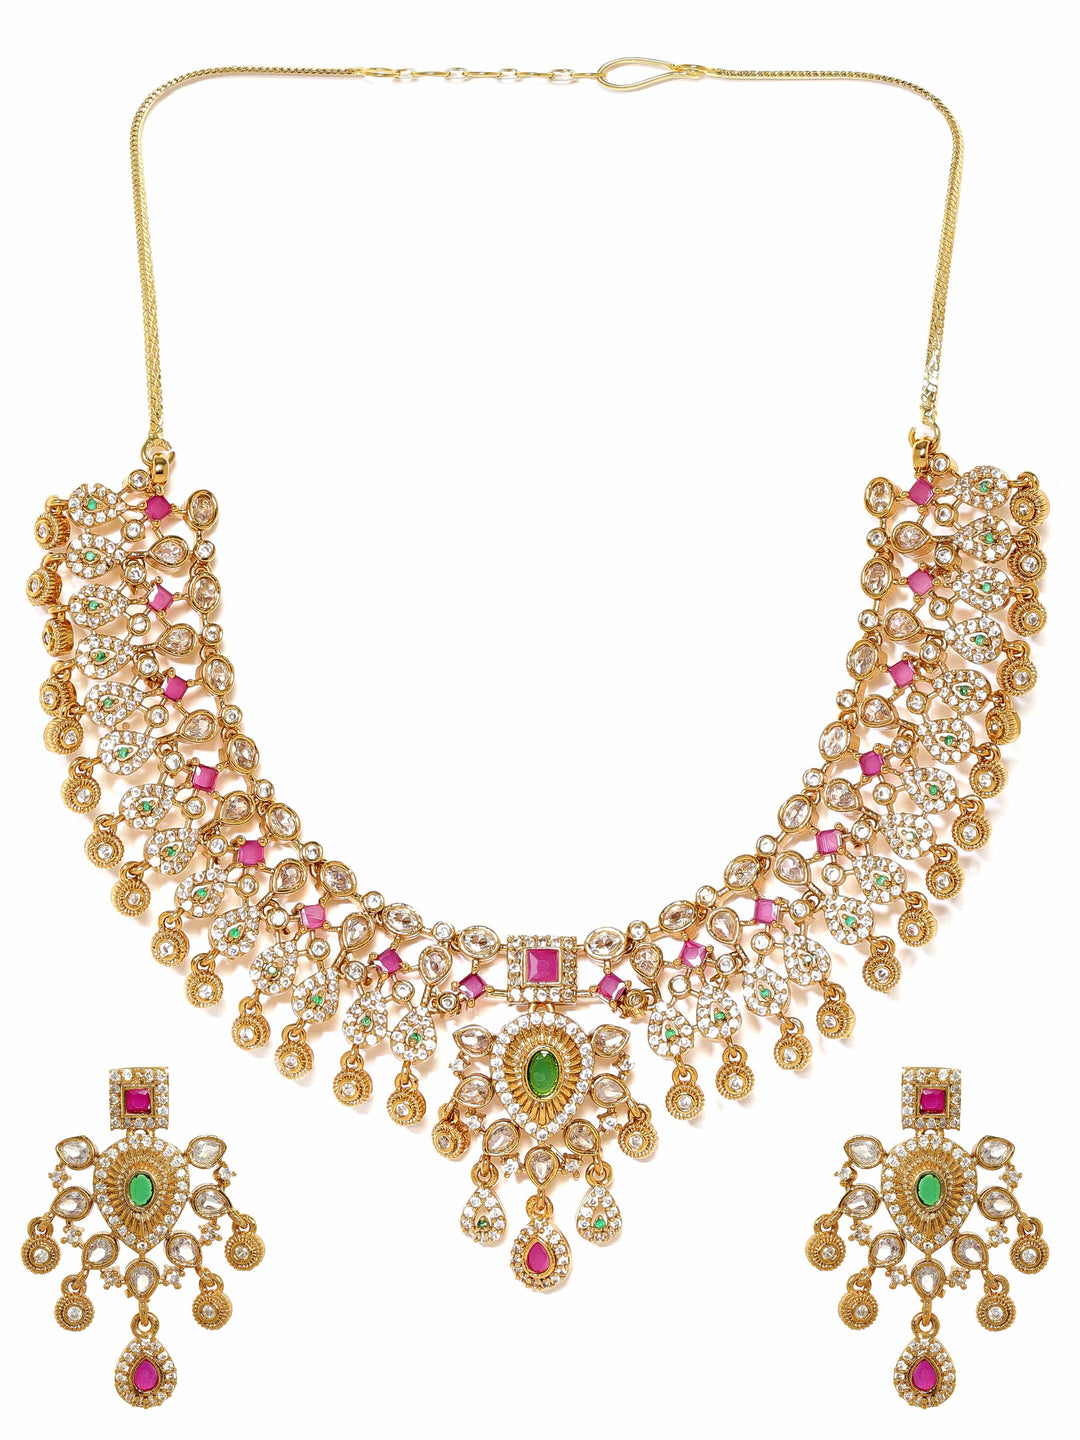 Rubans Regal Gold Tone Temple Necklace Set with Multicolored Stones by Rubans Jewellery Sets